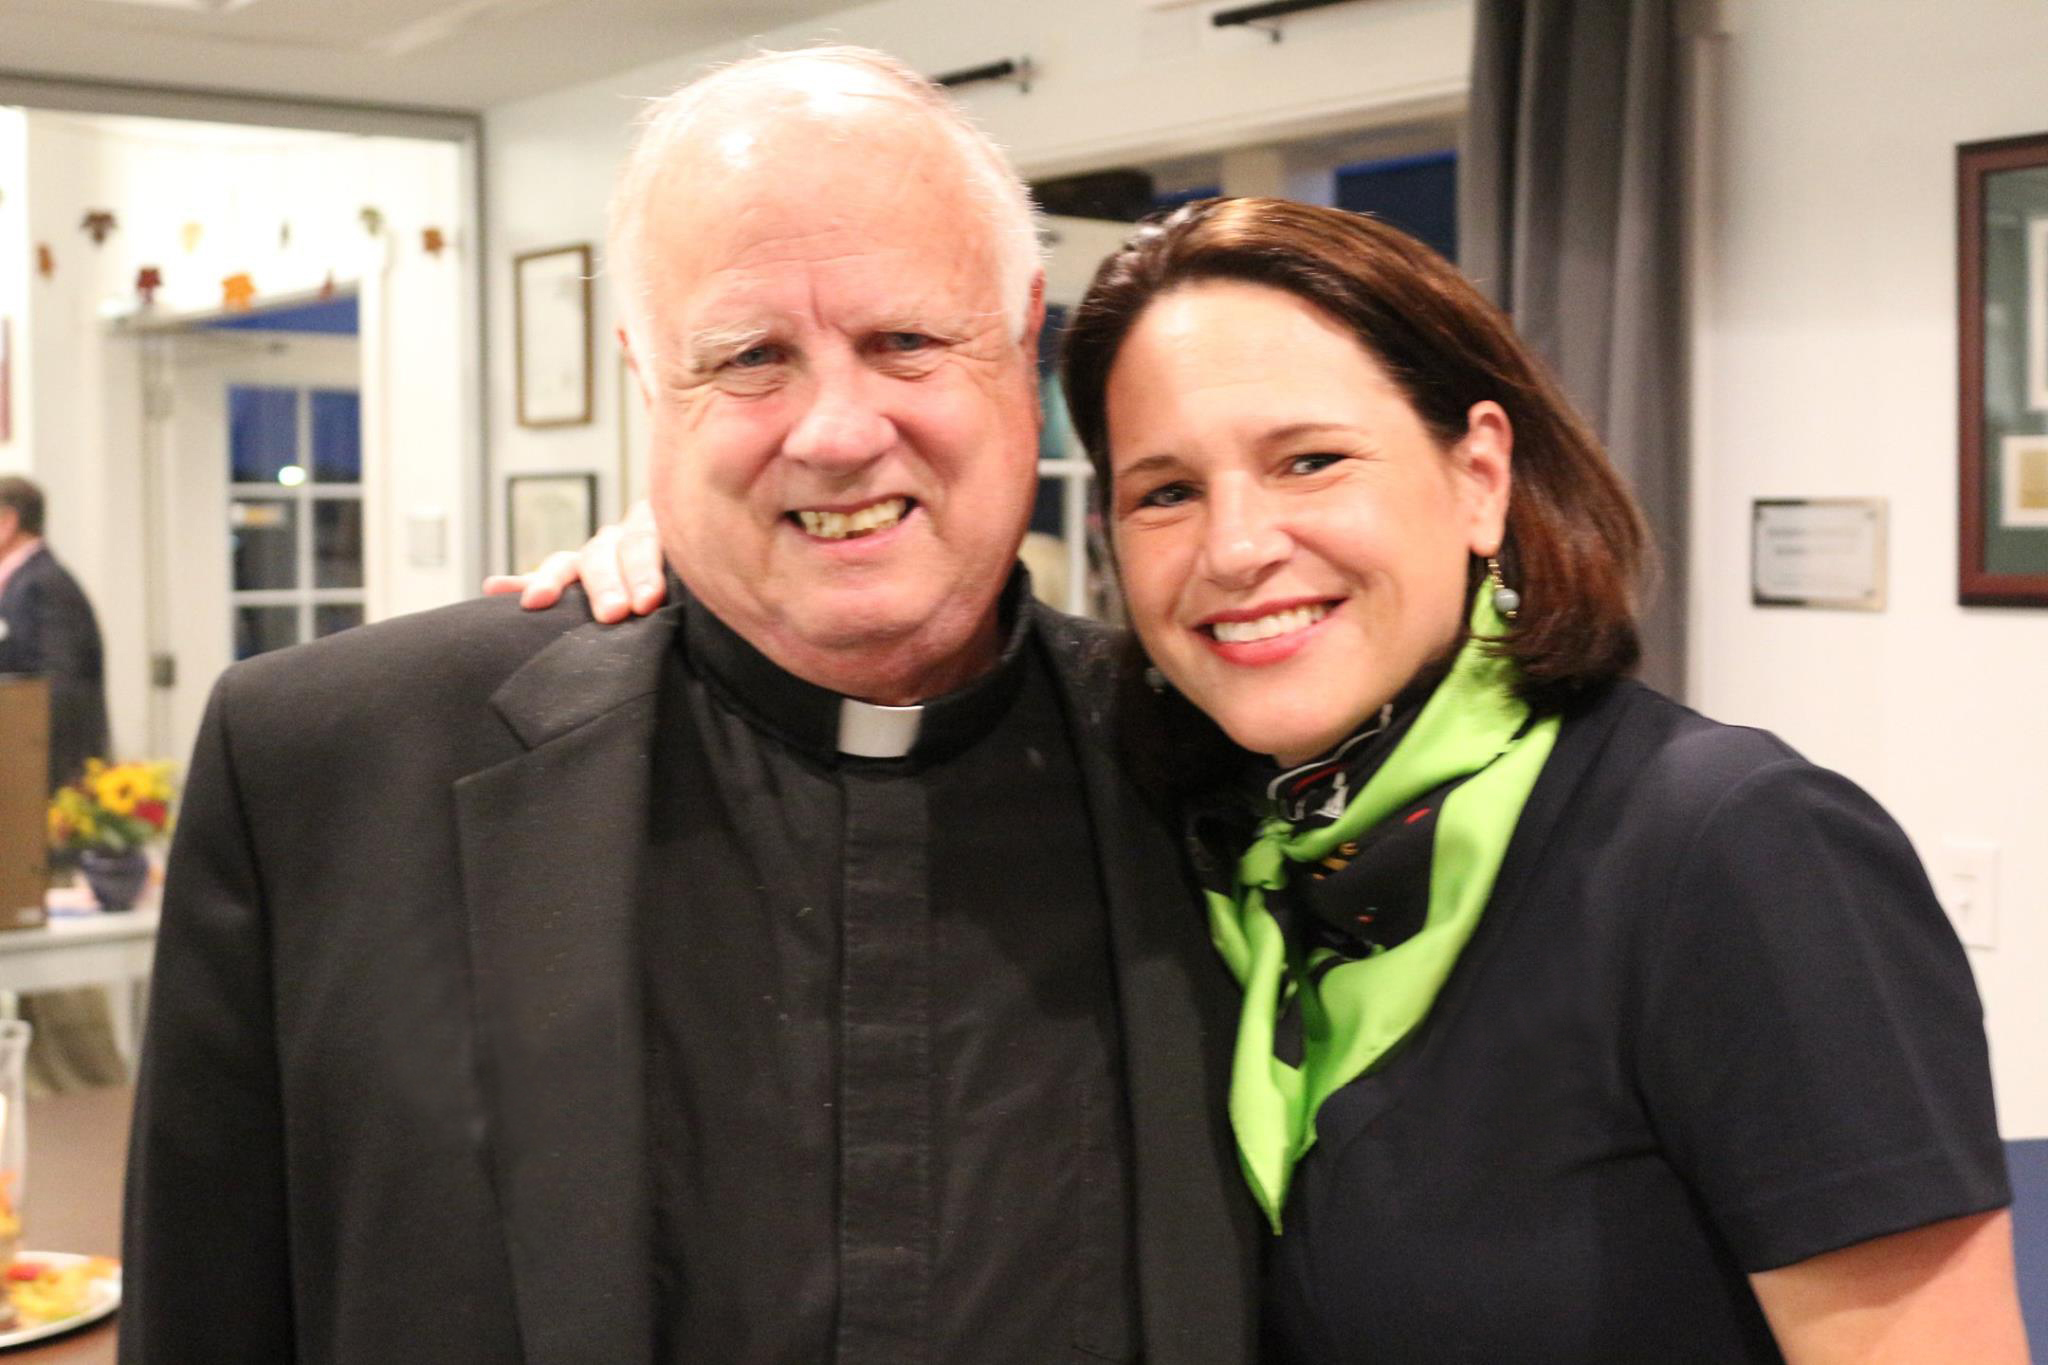 Father Paul Sheridan, Founder; with Kristin Ostby de Barillas, President and CEO in 2017